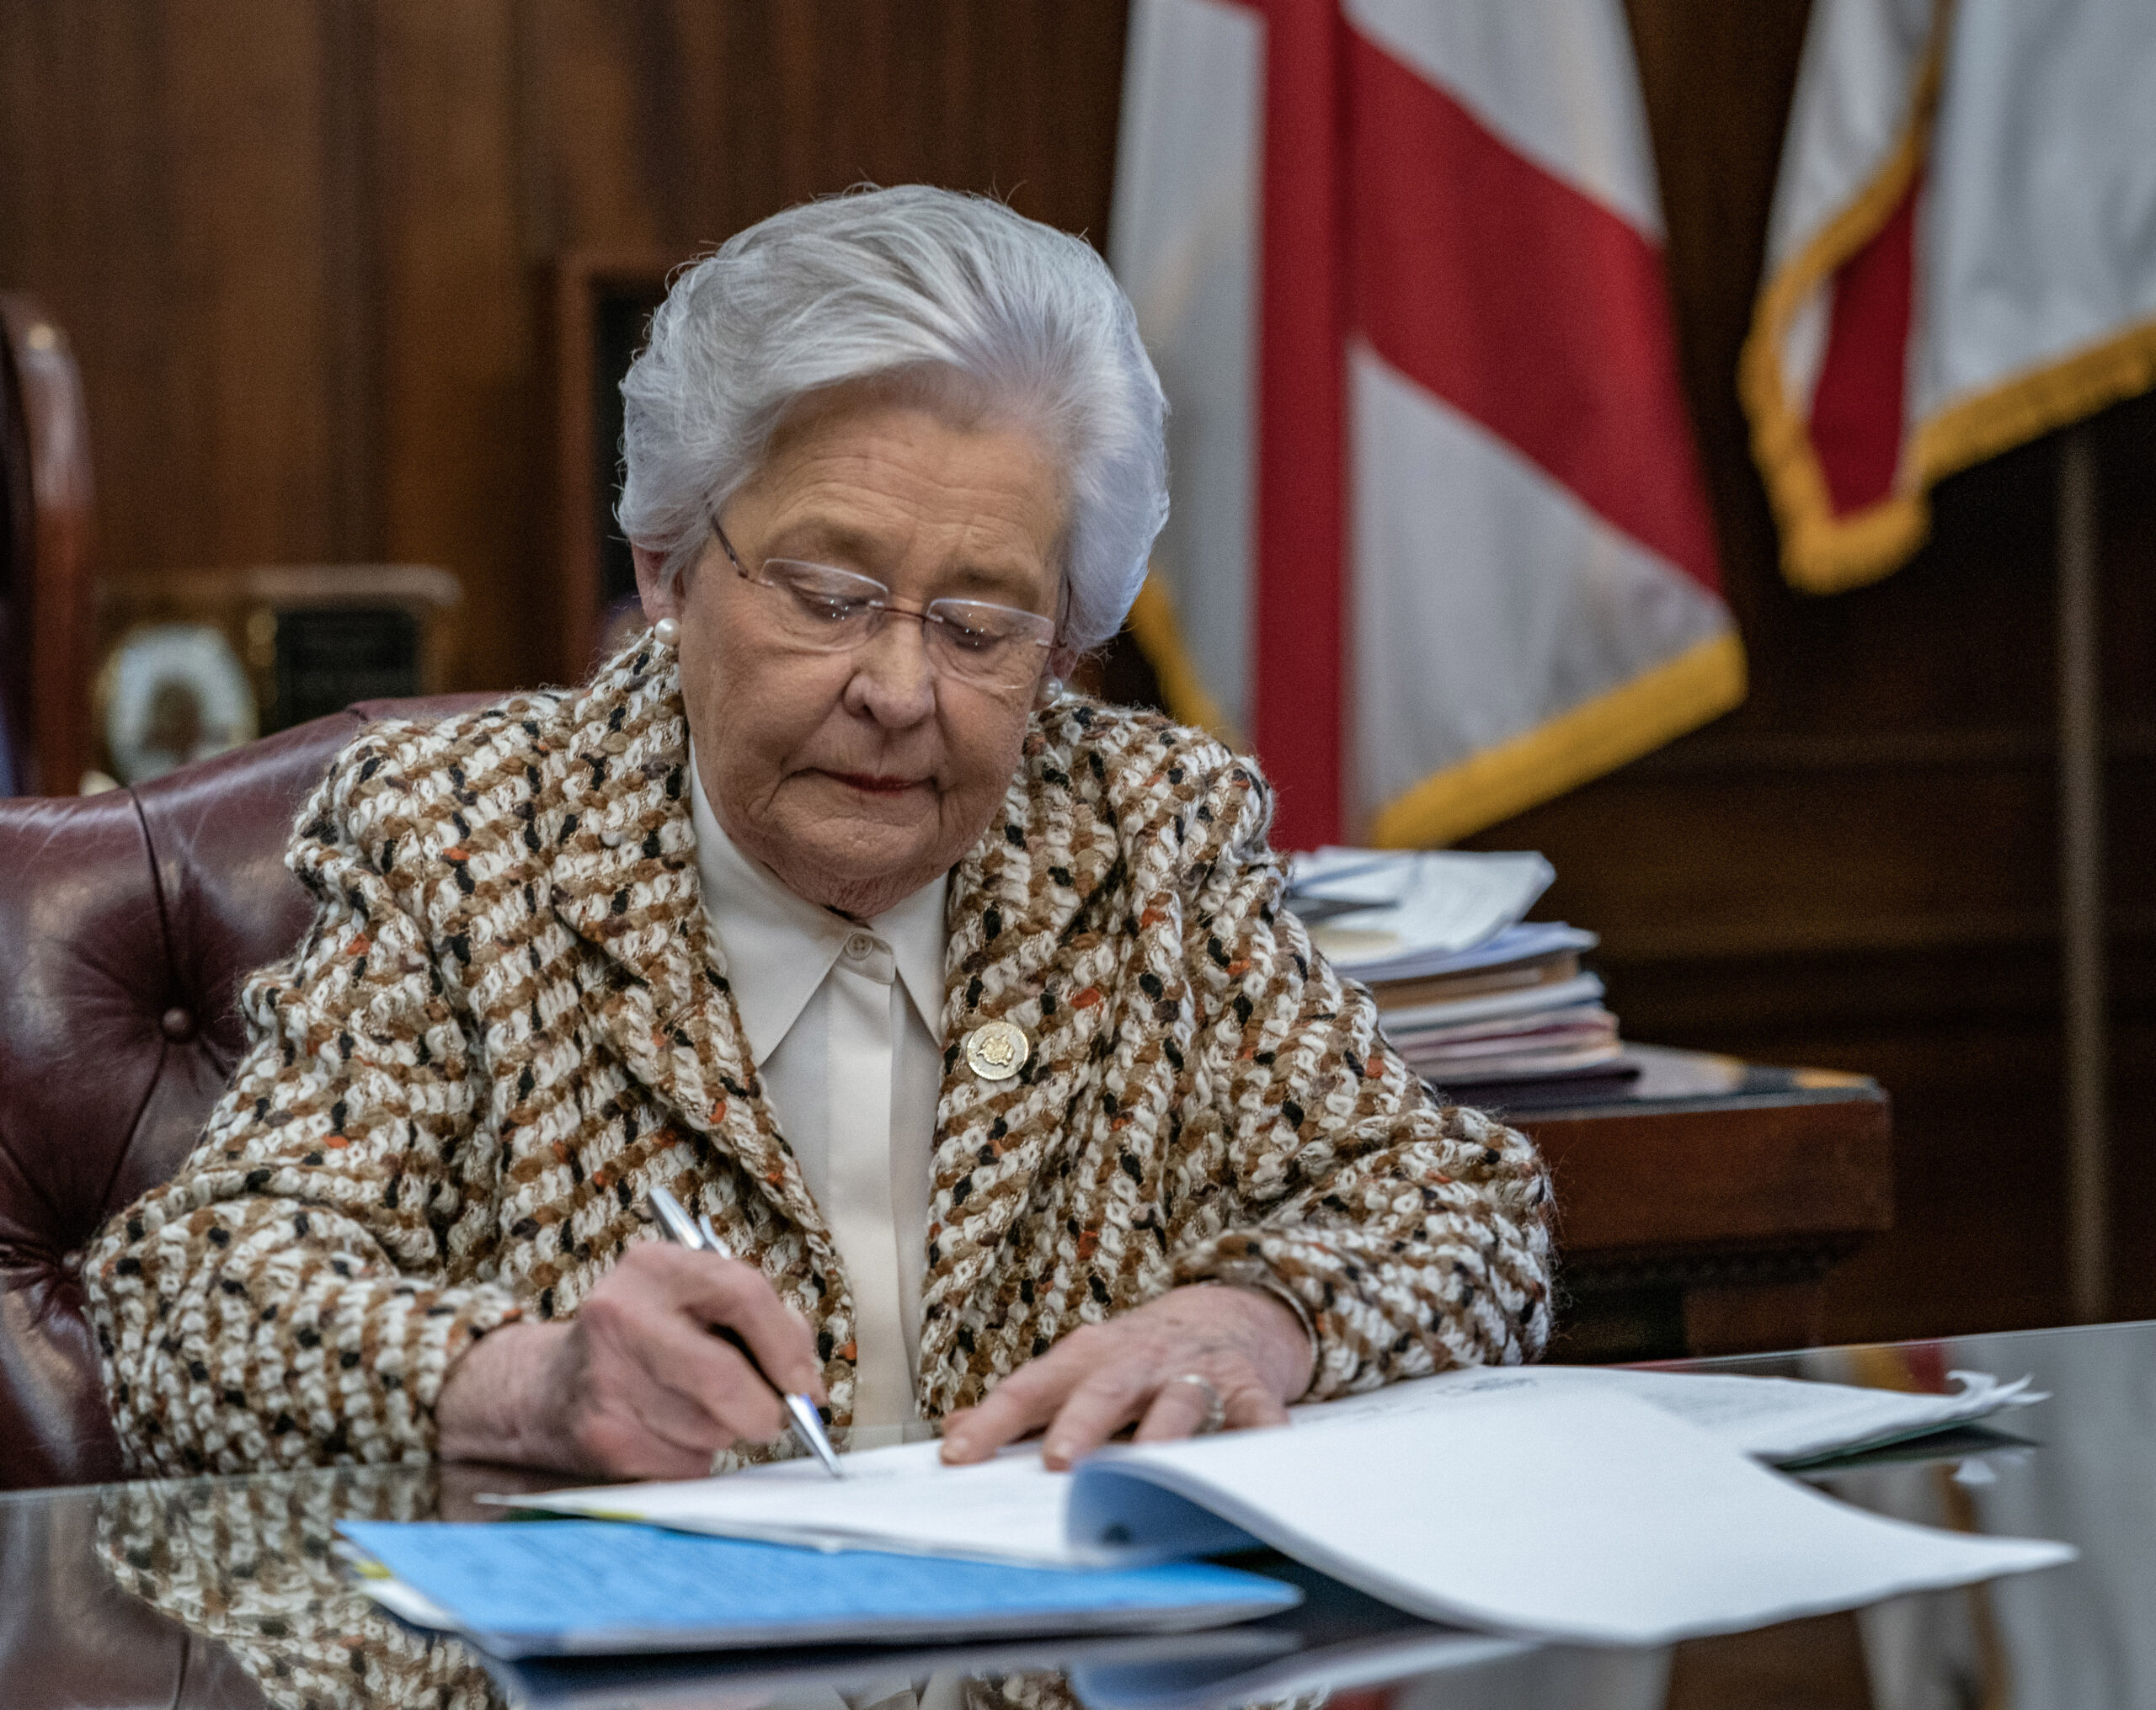 Governor Ivey Releases Statements Following Successful Special Session